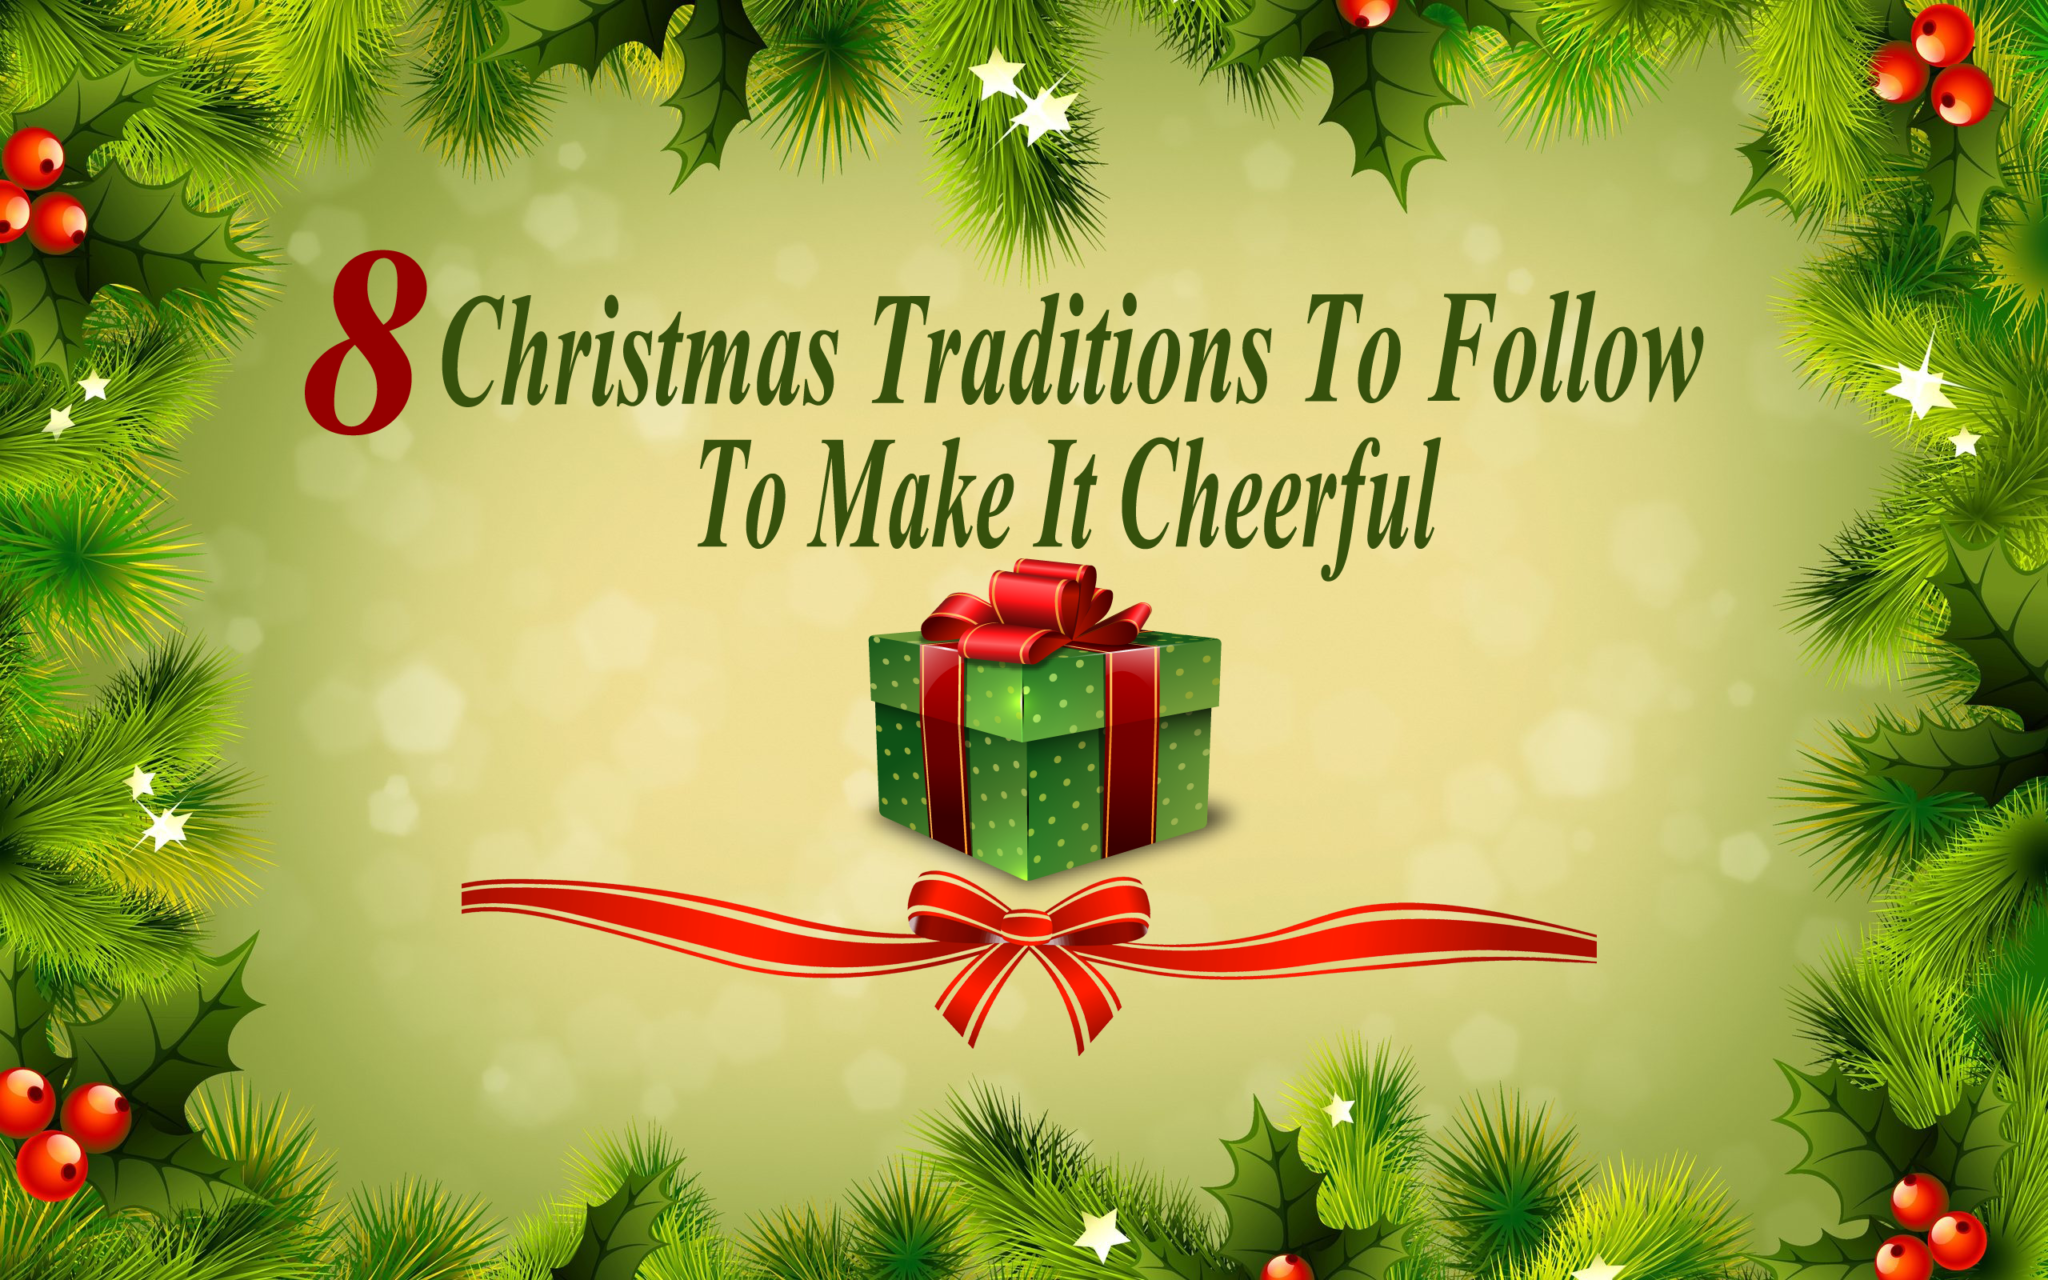 8 Christmas Traditions To Follow To Make It Cheerful